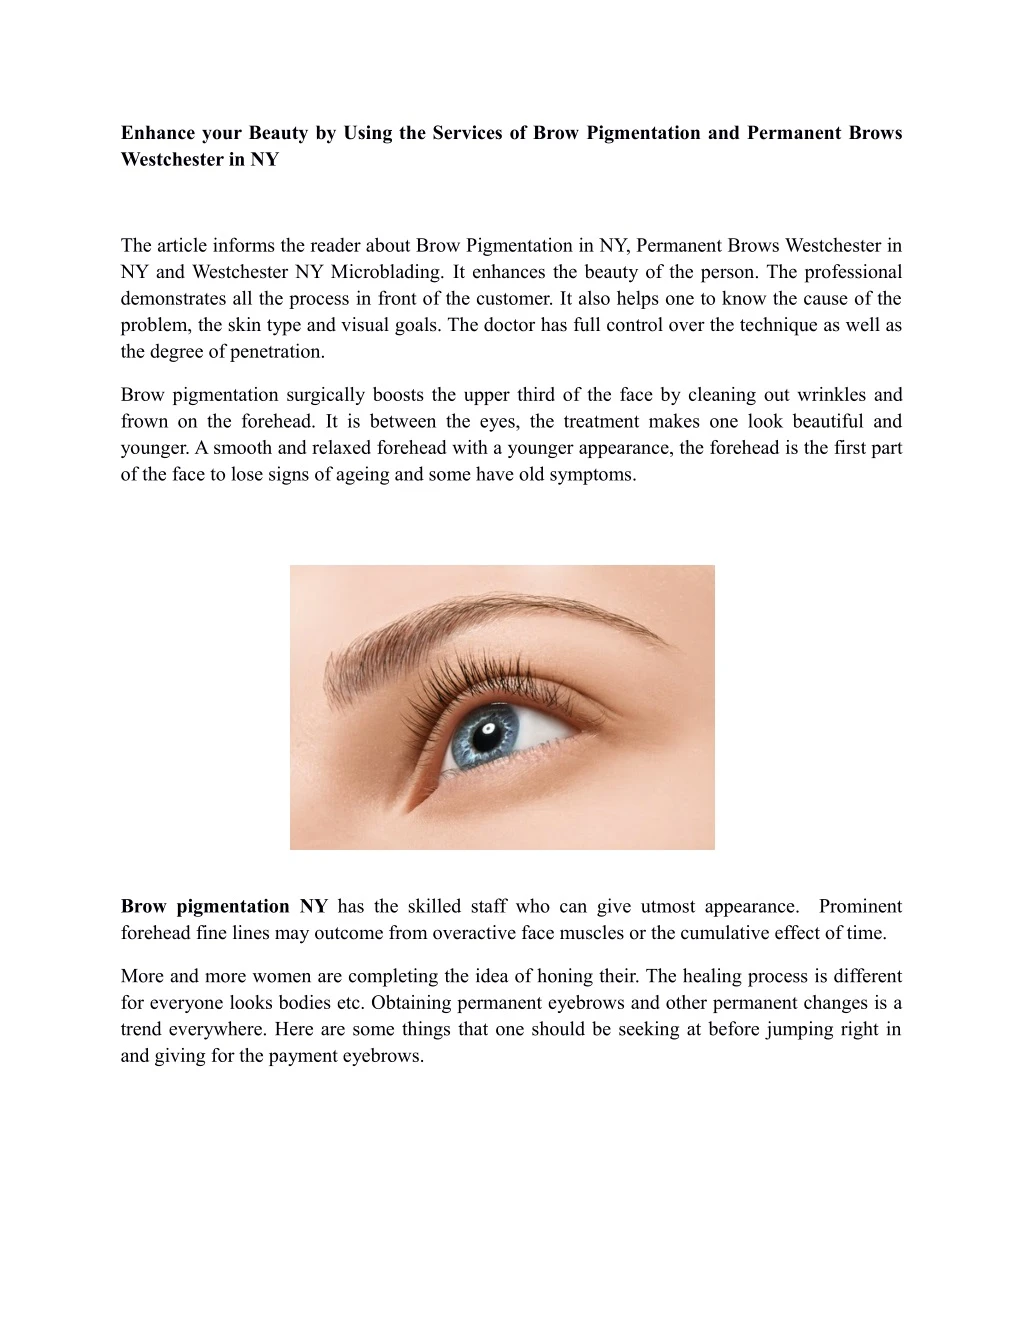 enhance your beauty by using the services of brow